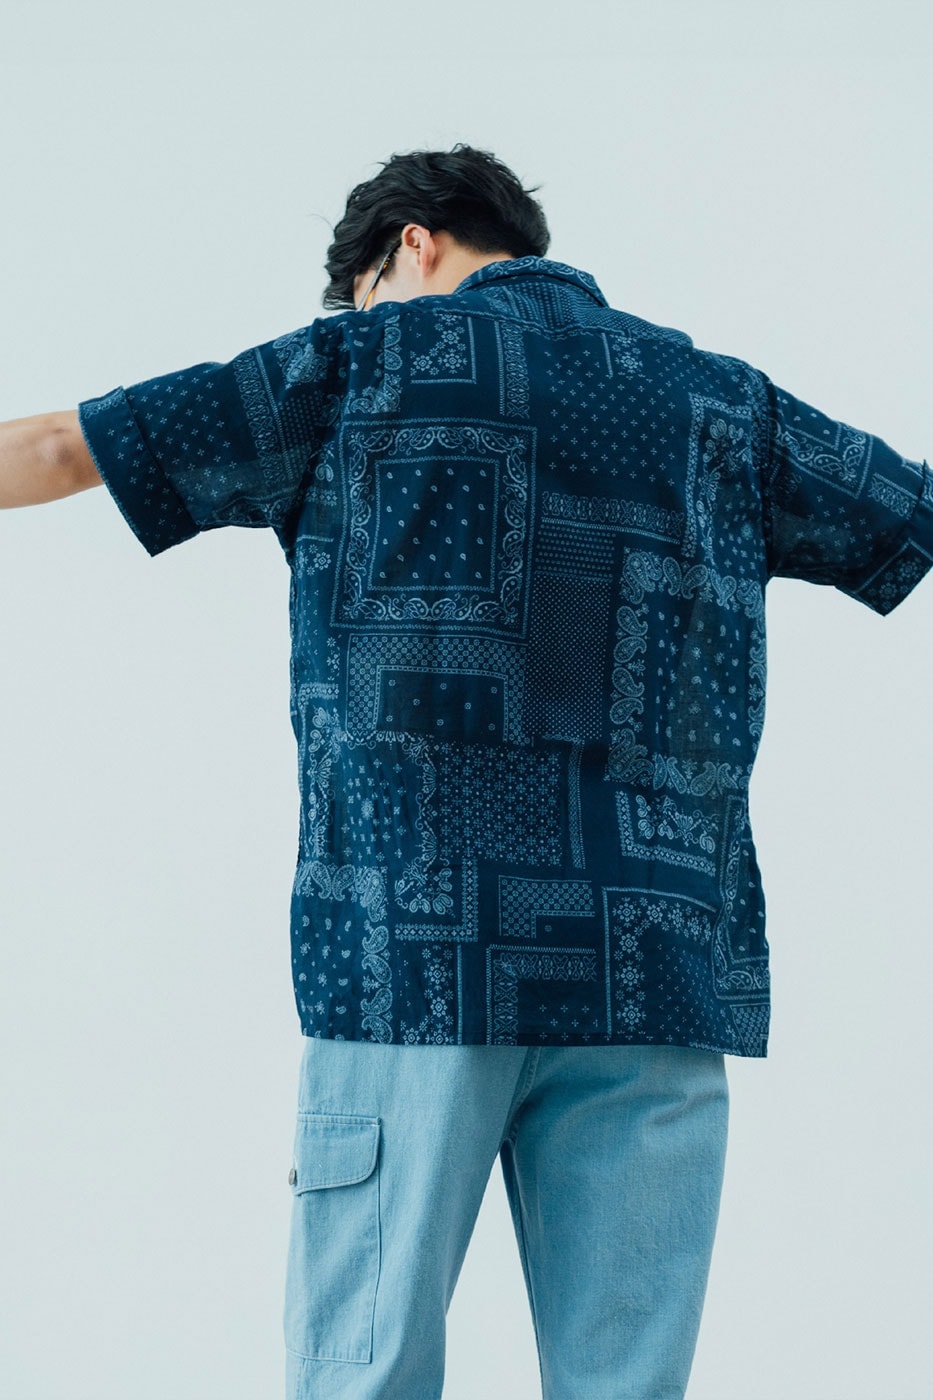 SYNDRO Combines Linens With Utilitarian Silhouettes for SS22 lookbook release info